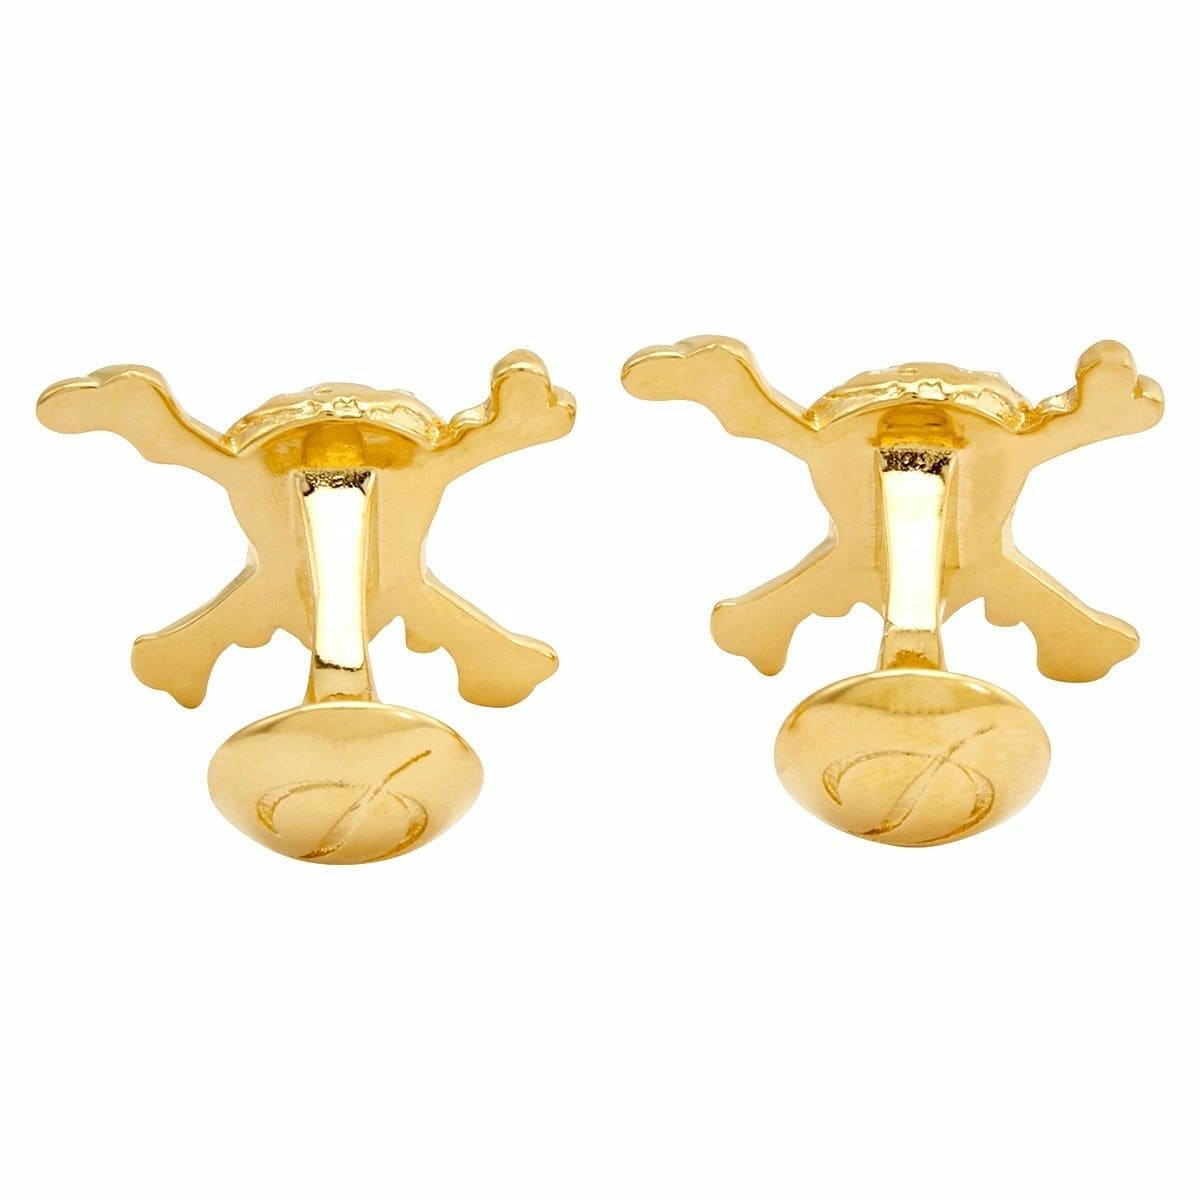 S.T. Dupont Pirates of the Caribbean Gold Finish Skull and Crossbones Cufflinks 005101PC 3597390234636